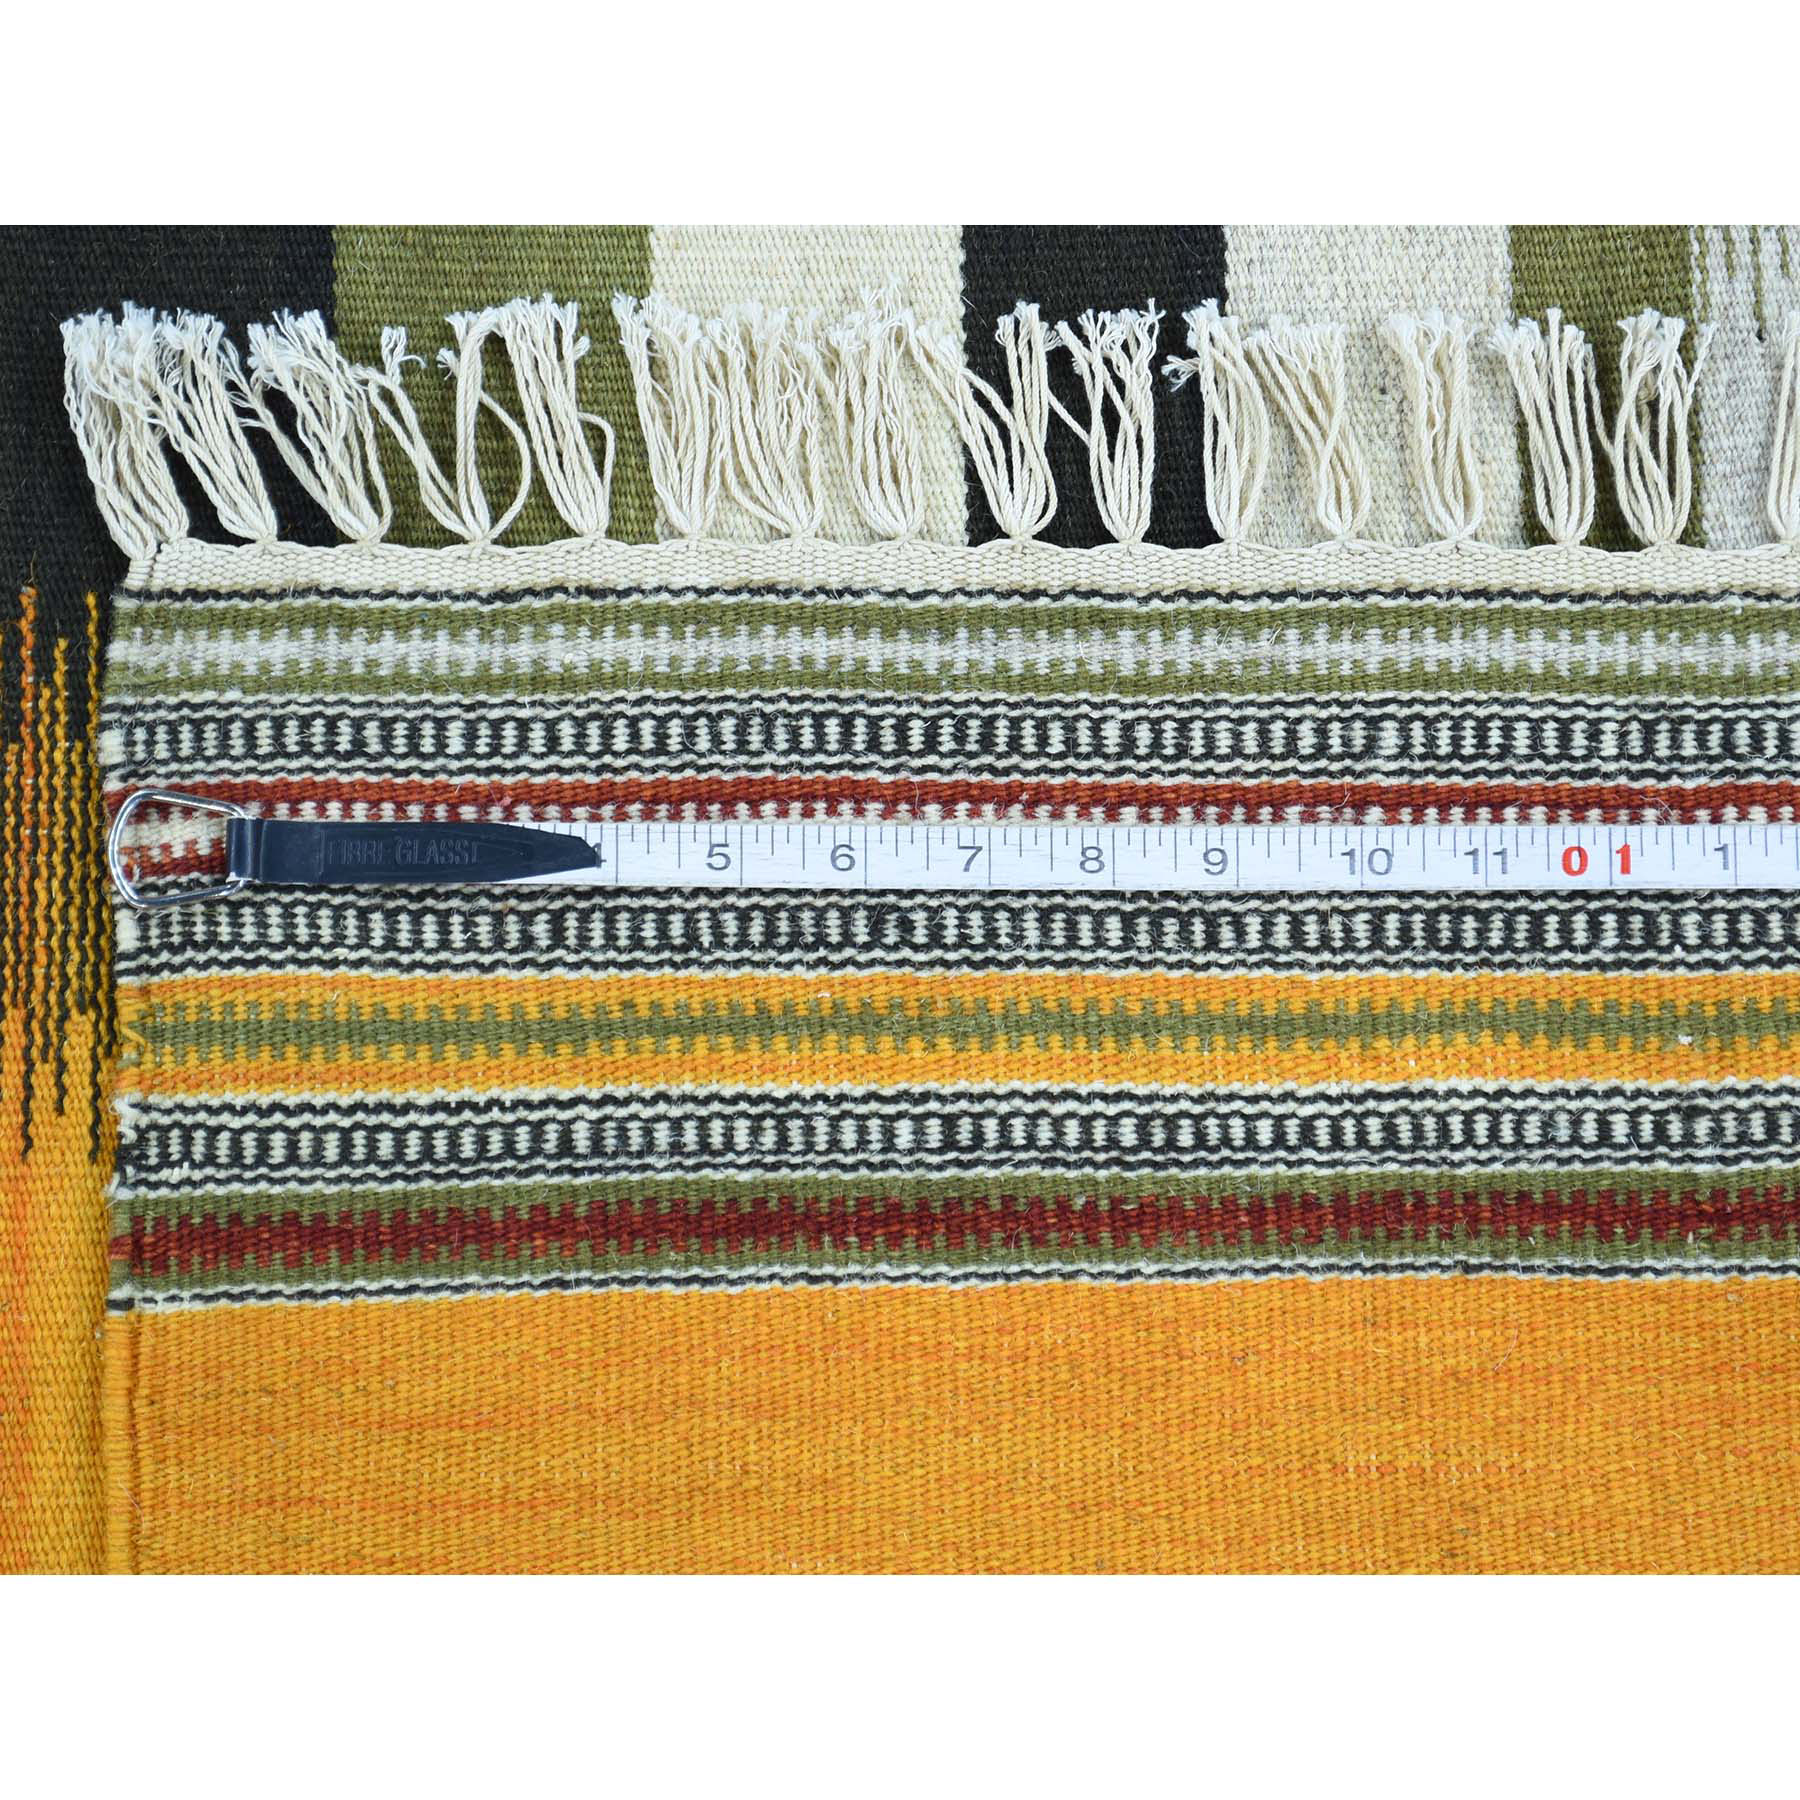 6-x9-3  Hand-Woven Pure Wool Dazzling Durie Kilim Flat Weave Carpet 